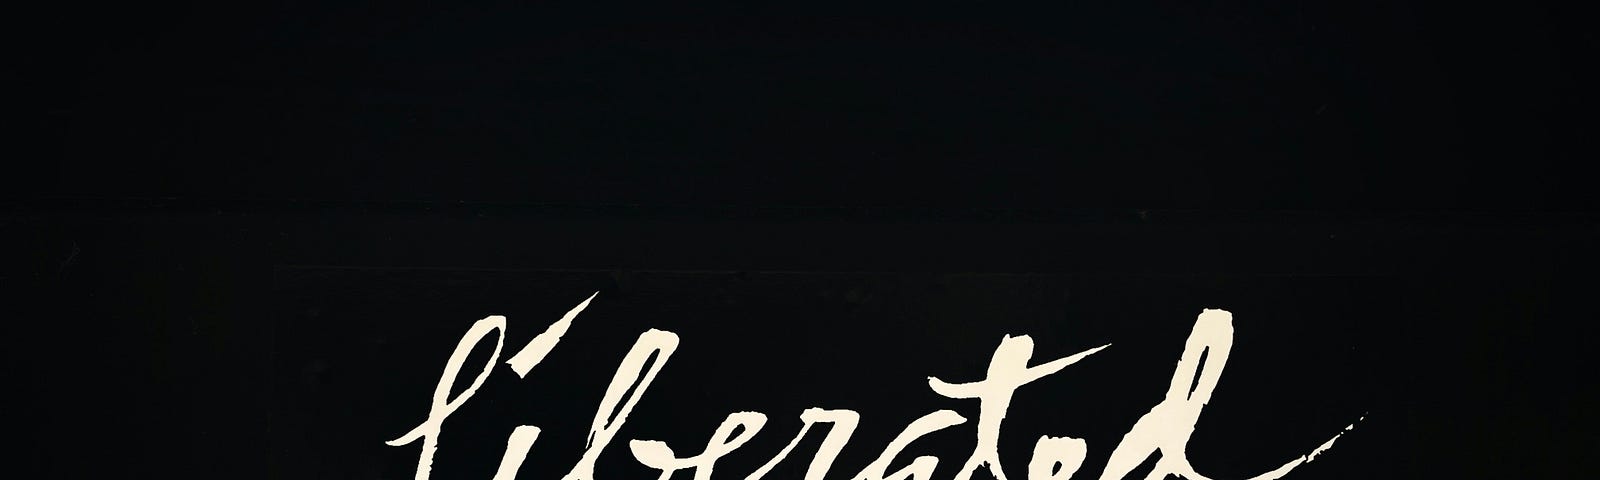 Italic white letters on a black background saying, “Liberated.”